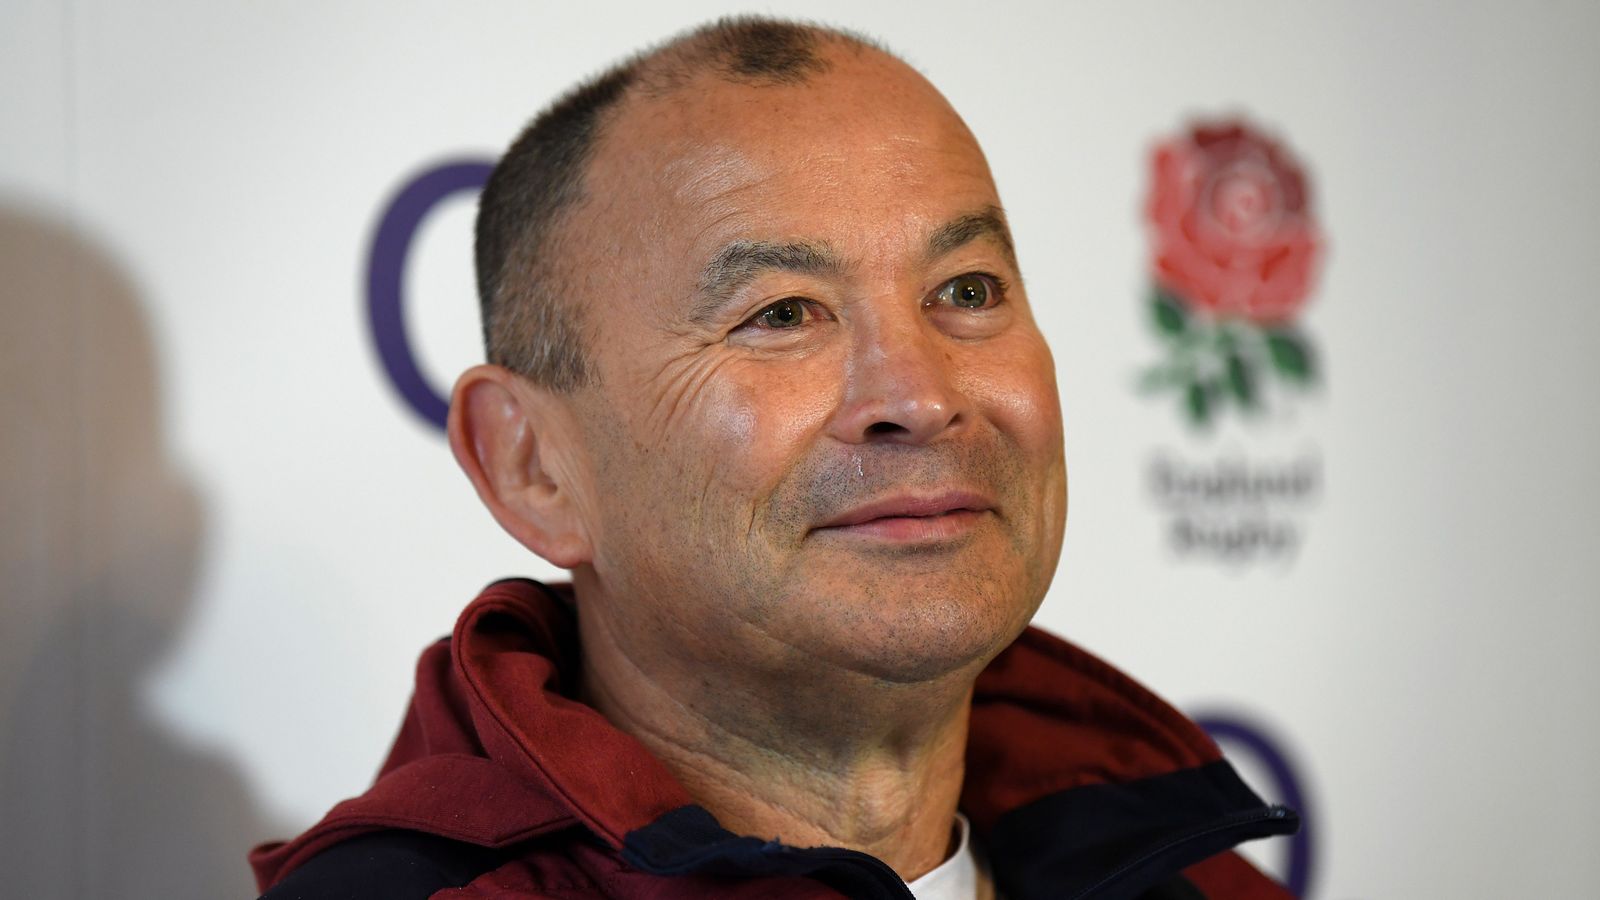 England rugby coach Eddie Jones sorry for implying reporter thinks half-Asians 'look the same'